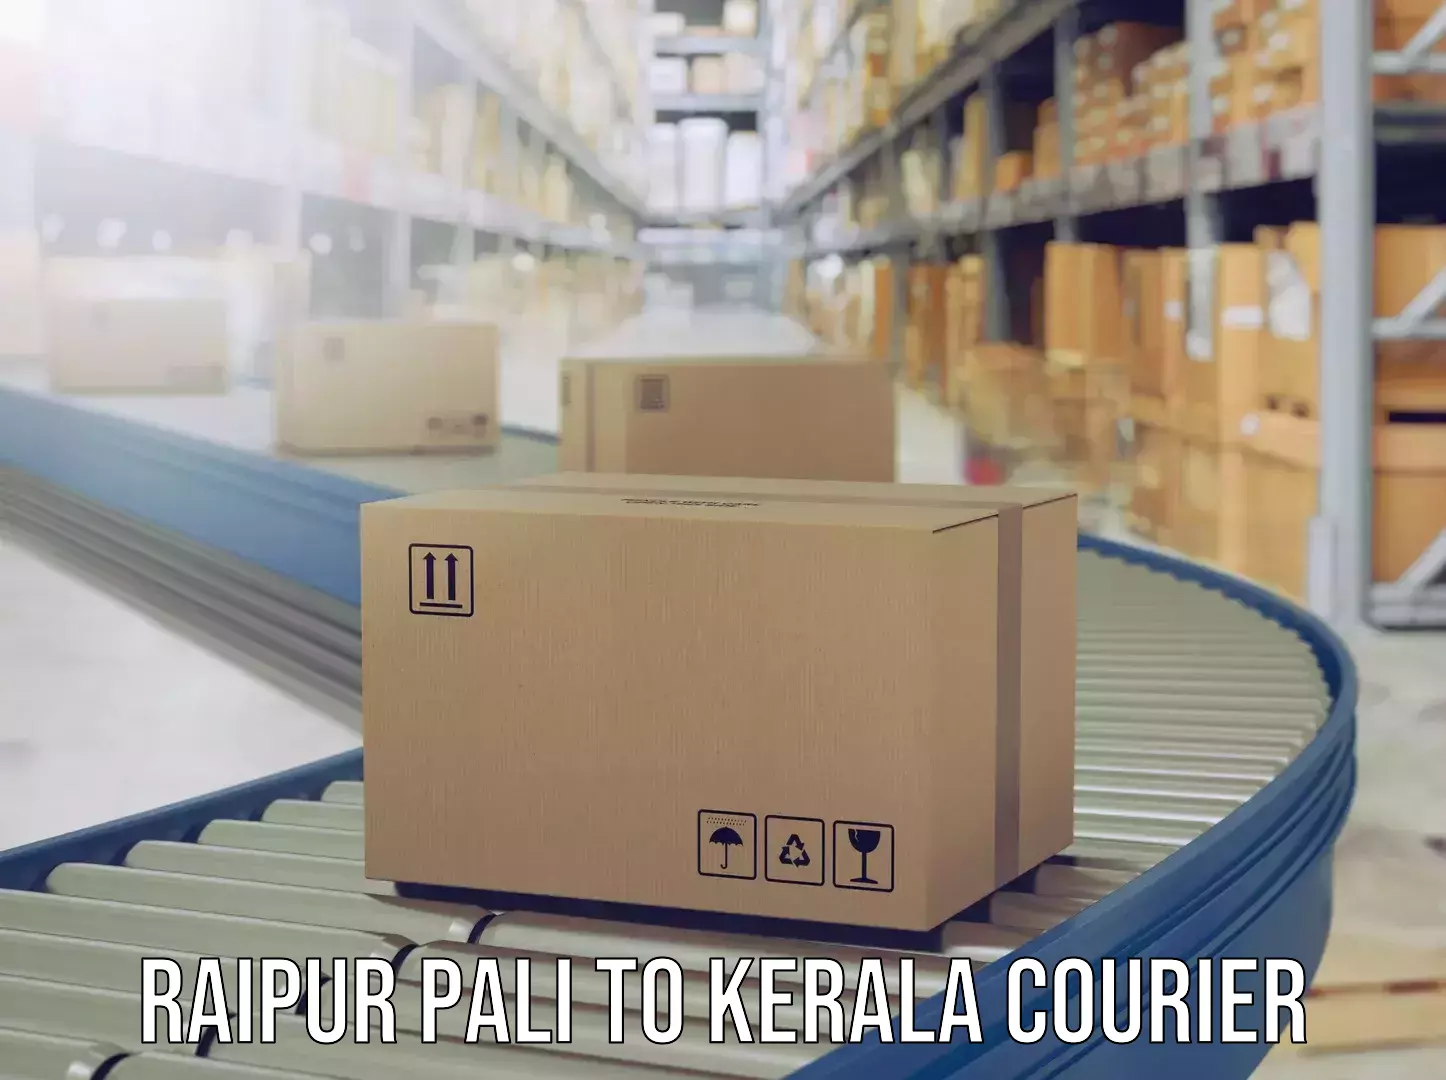 Luggage shipping guide Raipur Pali to Cochin University of Science and Technology